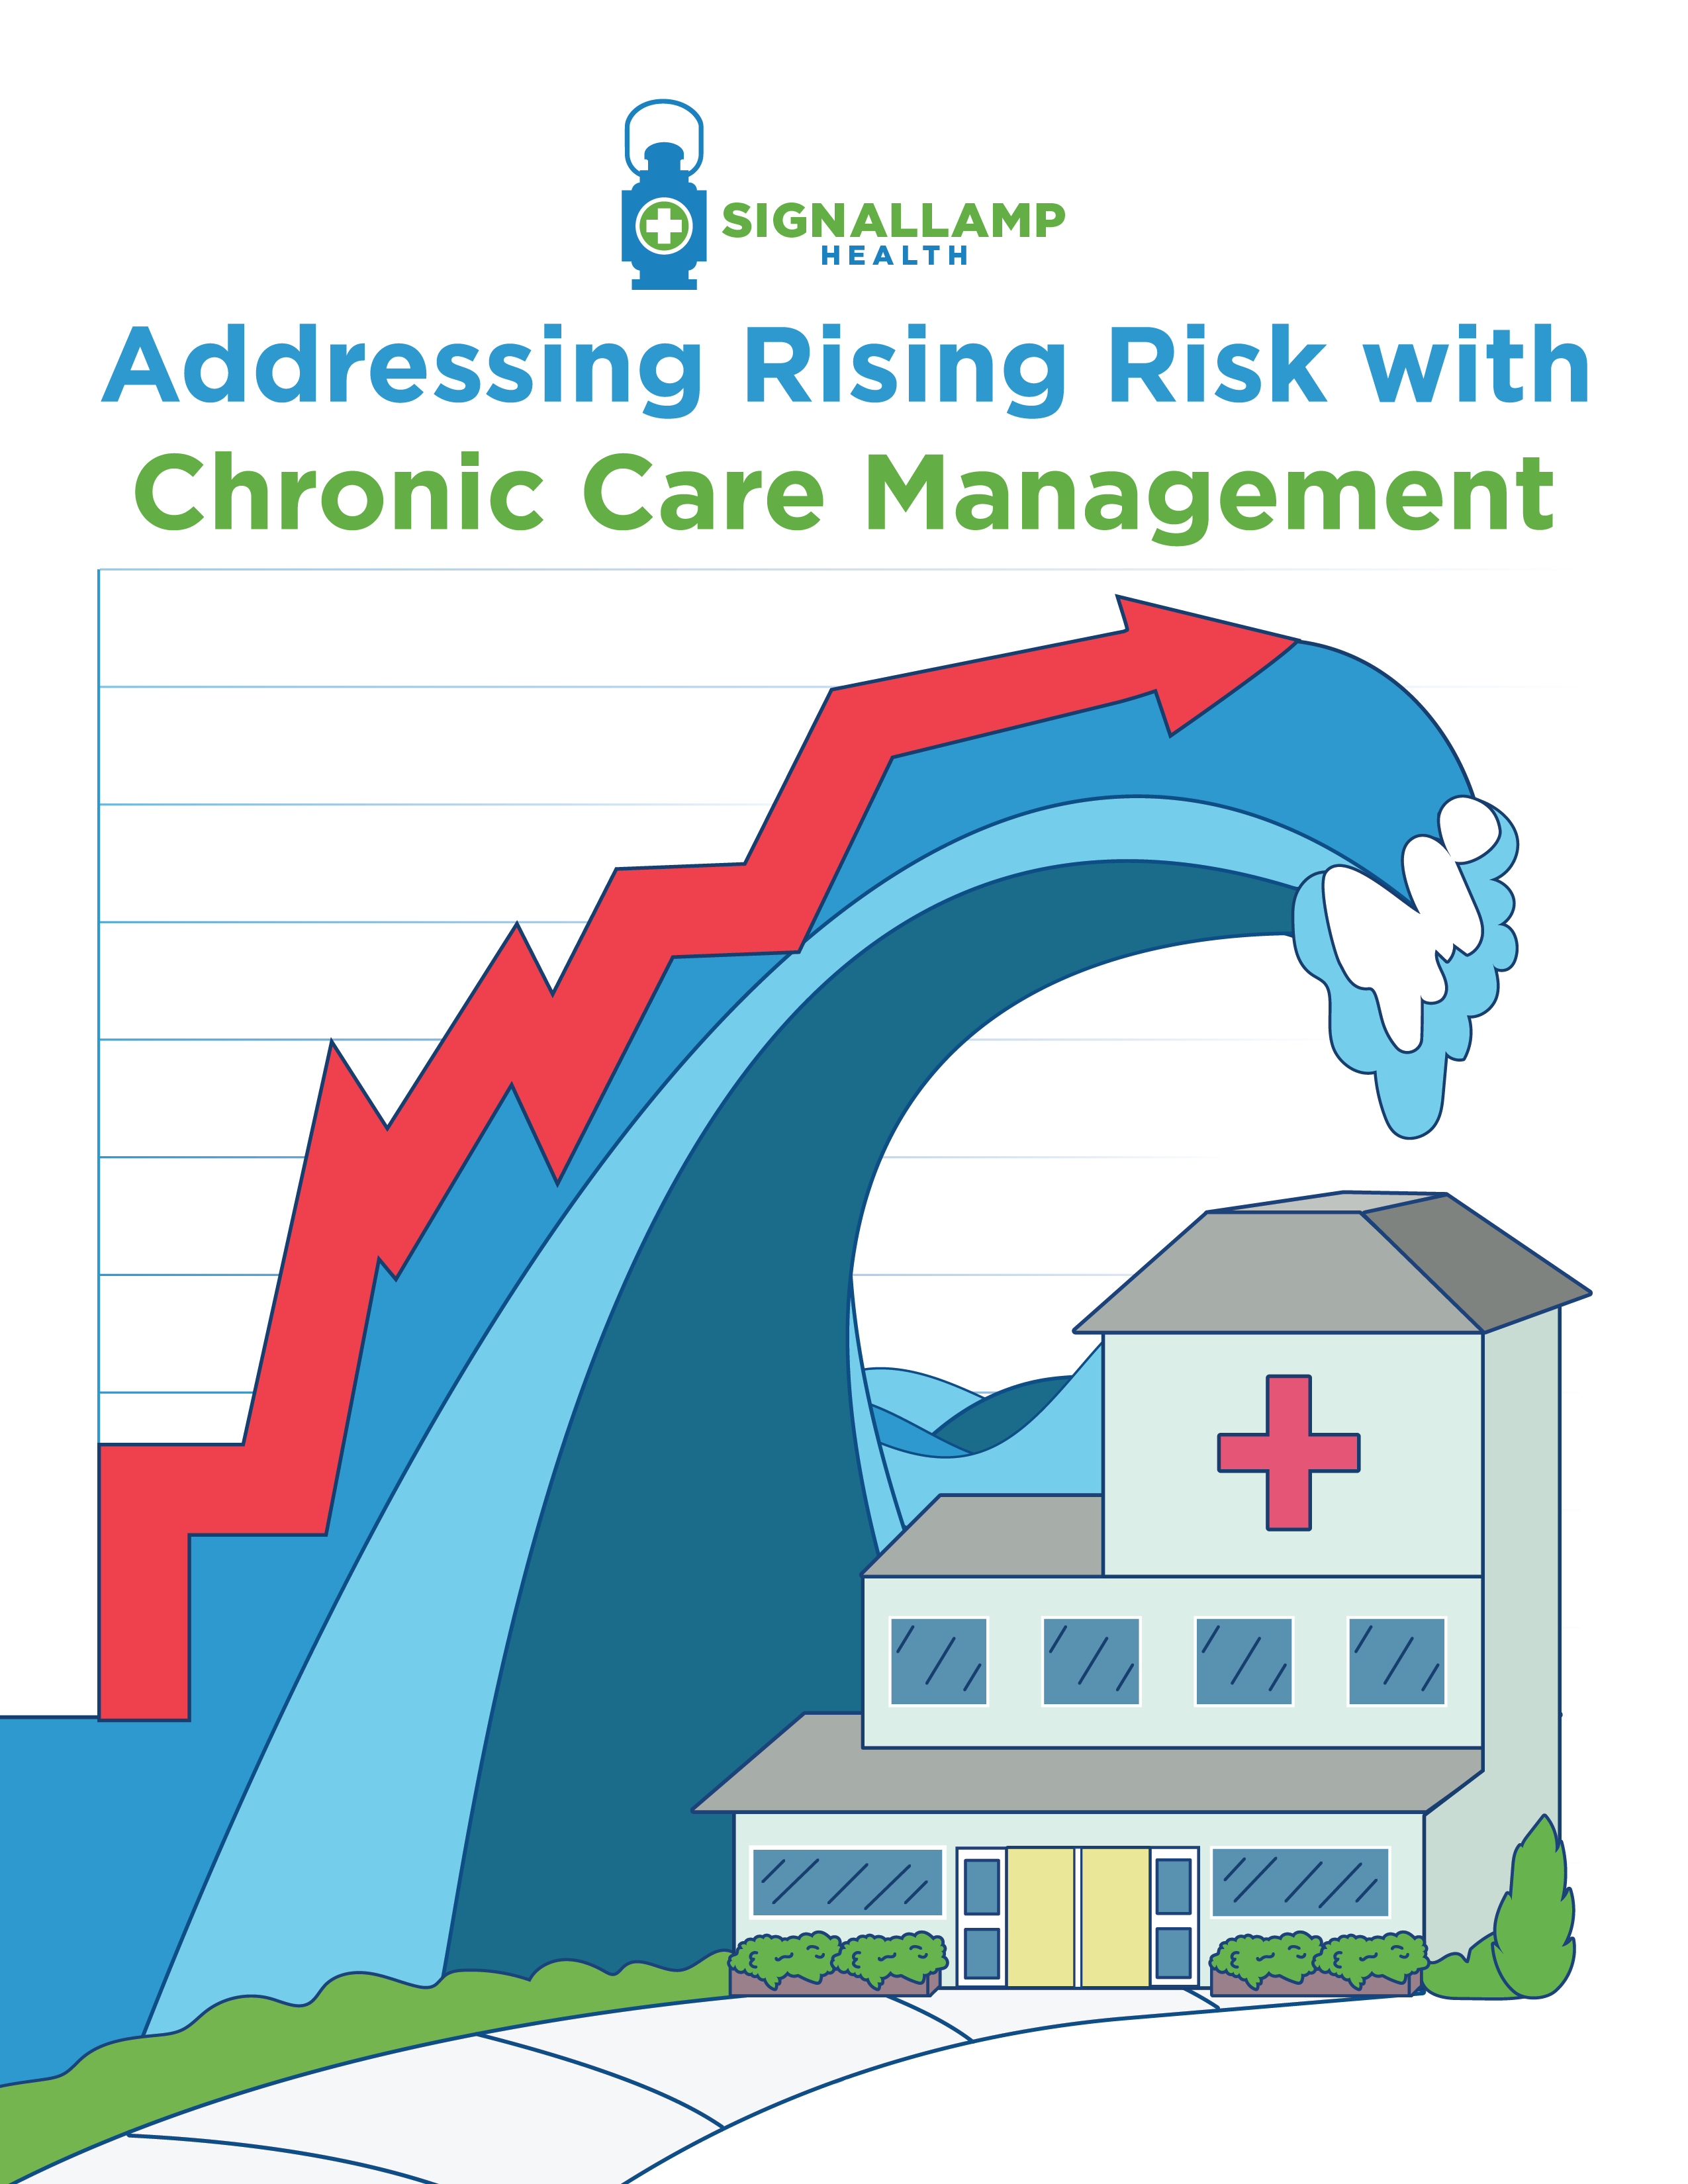 Addressing Rising Risk with Chronic Care Management